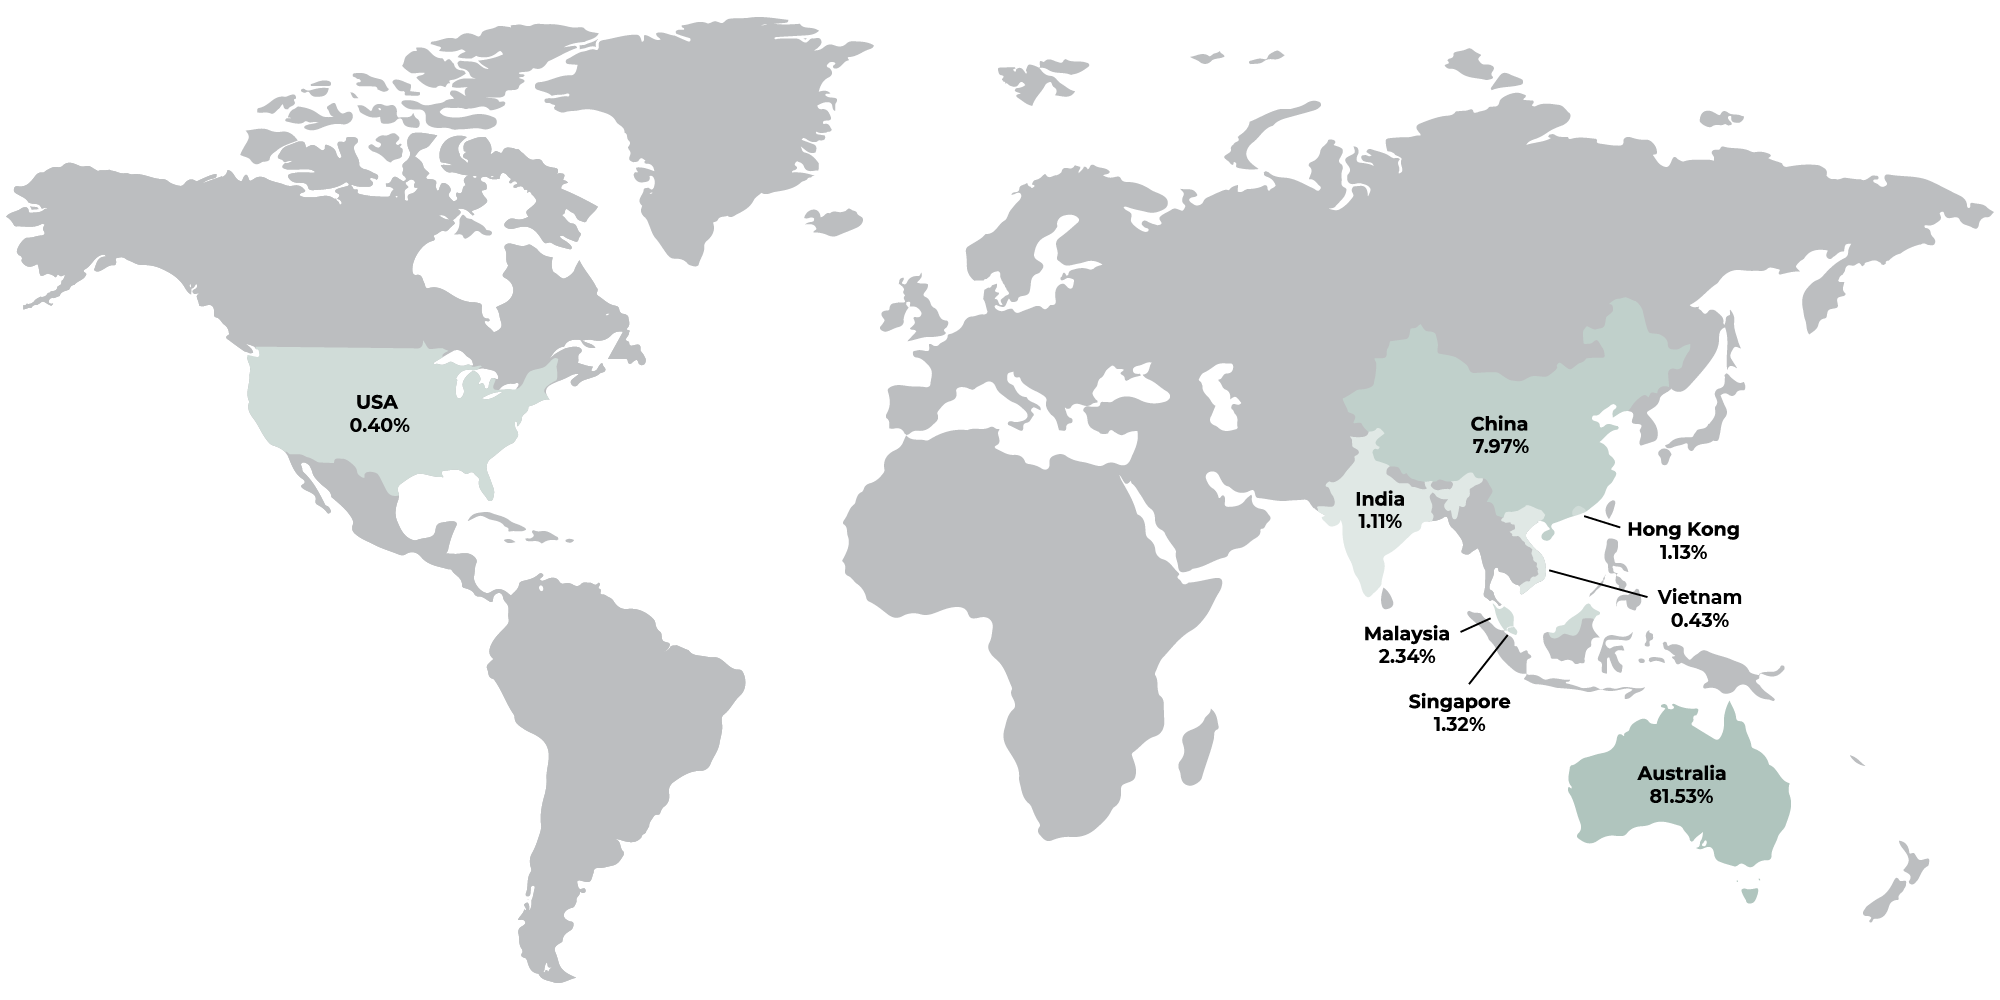 Map of the world showing the top 8 countries where alumni reside